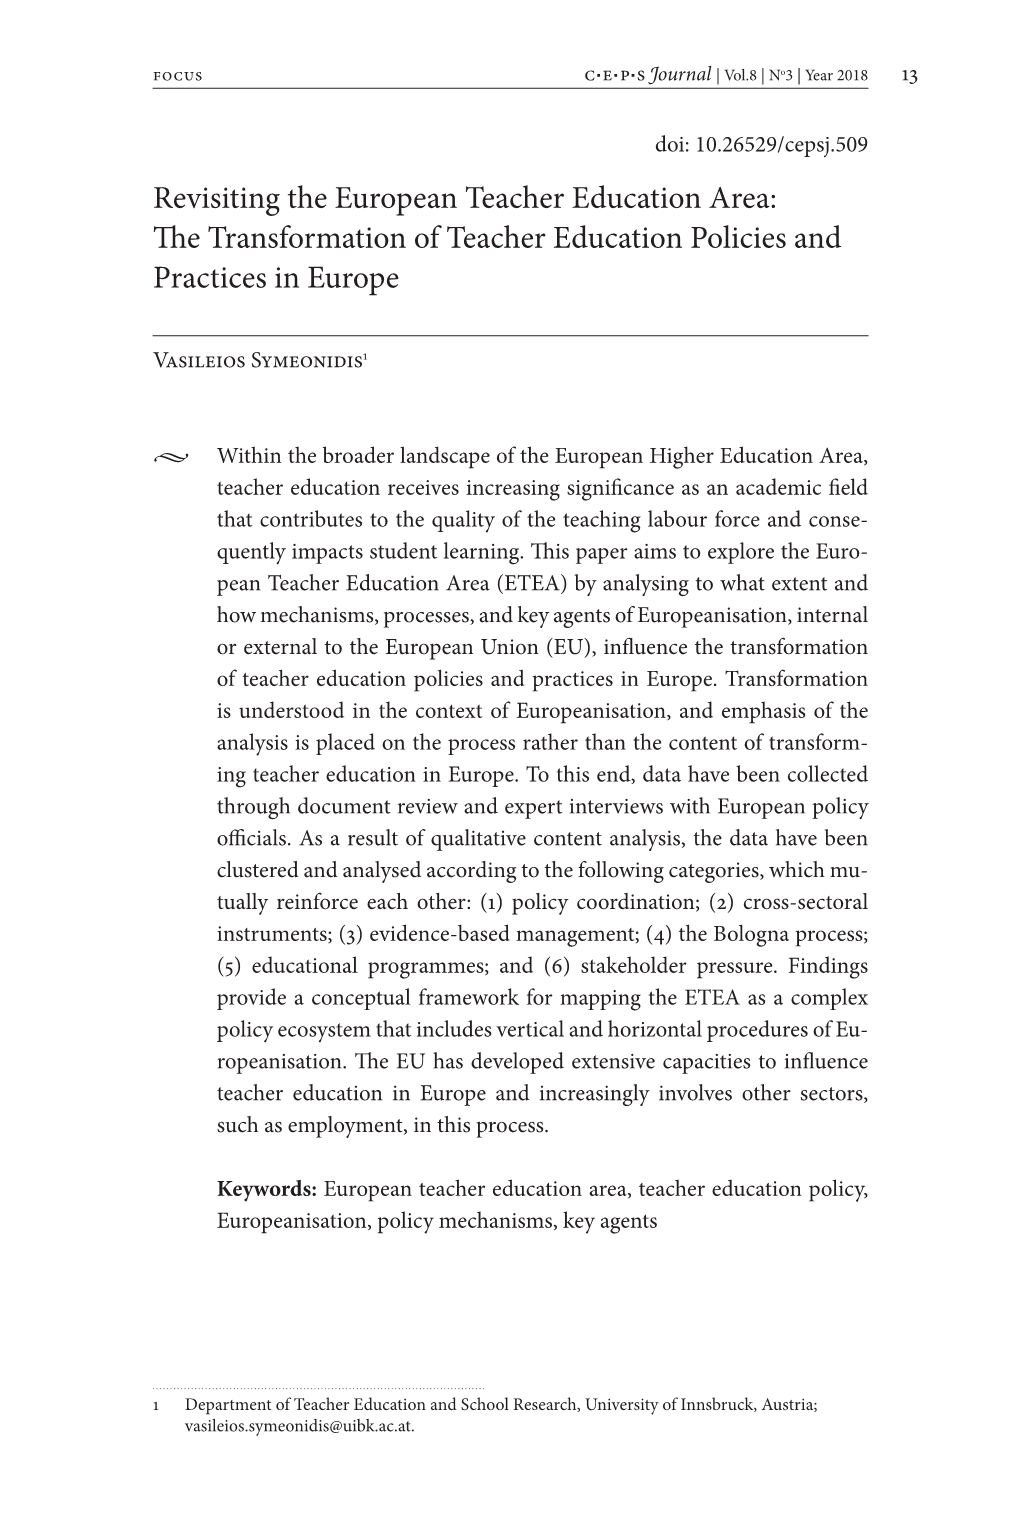 Revisiting the European Teacher Education Area: the Transformation of Teacher Education Policies and Practices in Europe